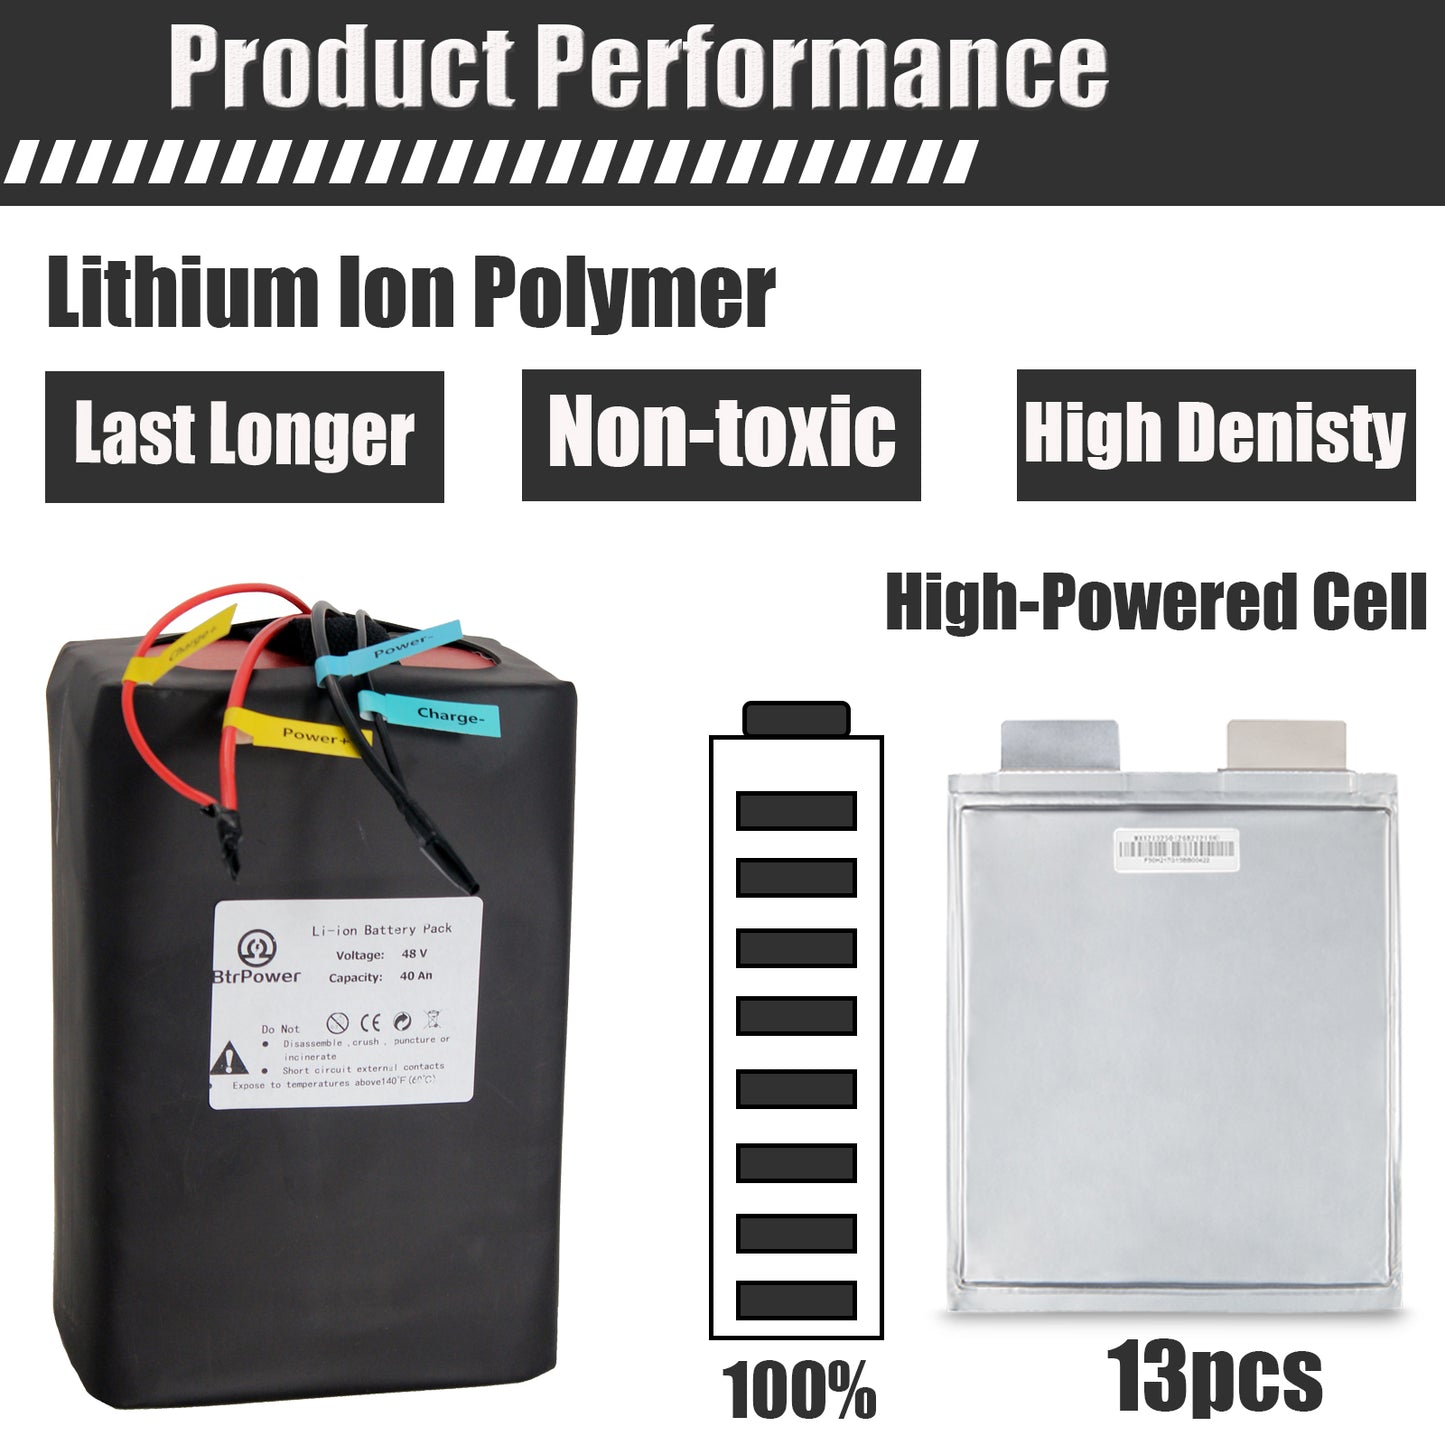 BtrPower Ebike Battery 48V 40AH Li-ion Battery Pack with 5A Charger, 50A BMS